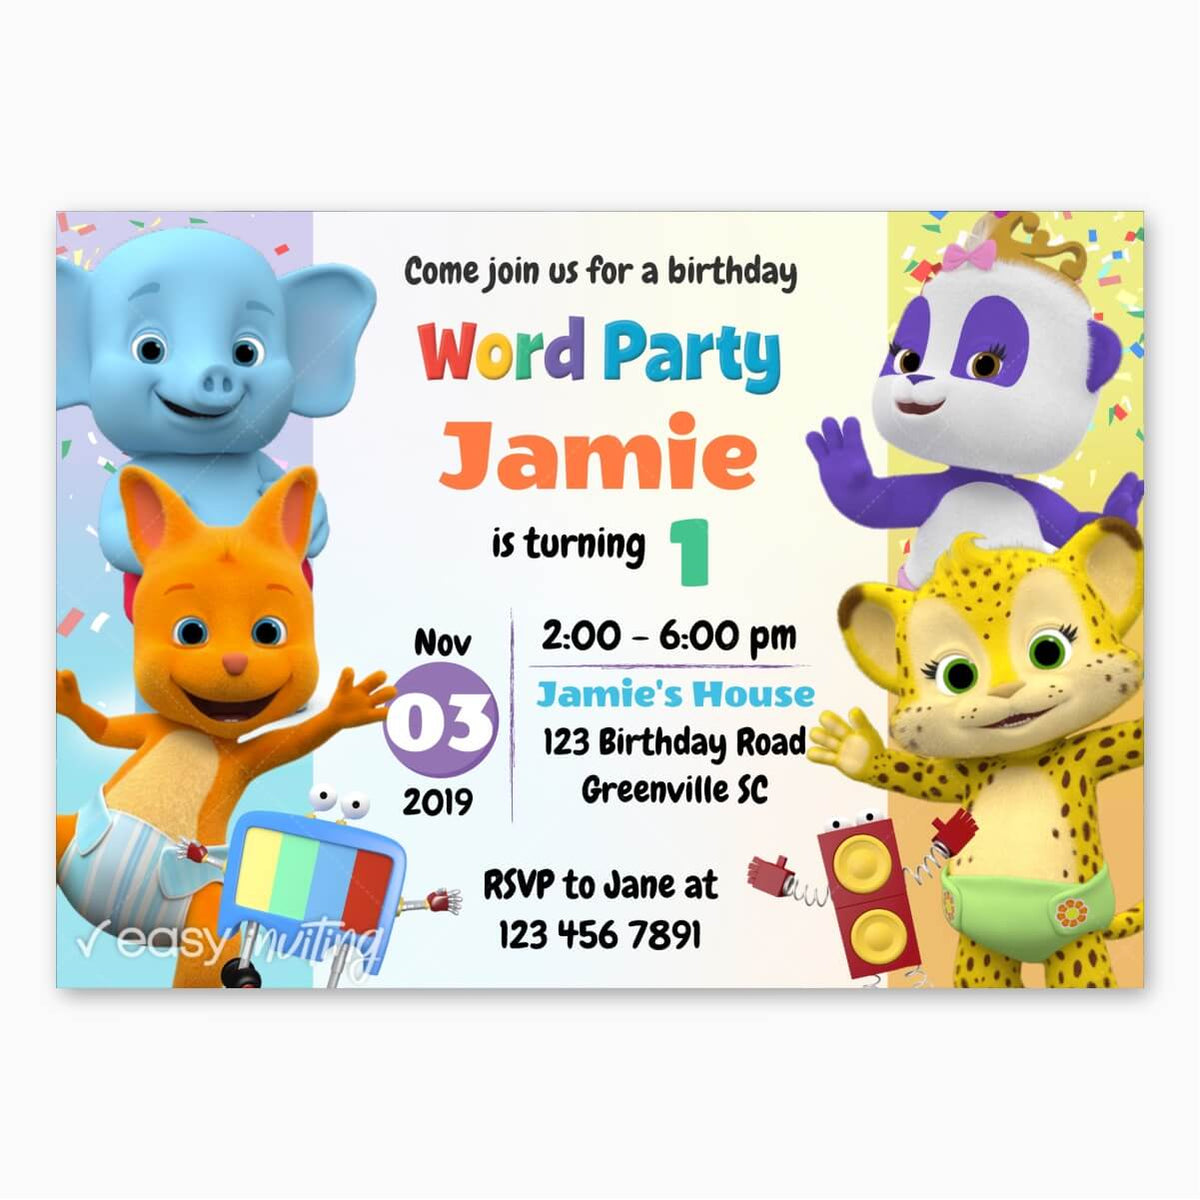 MS Word Invitation Card Template for Son's Birthday  Birthday invitation  card template, Free birthday invitations, Birthday invitations